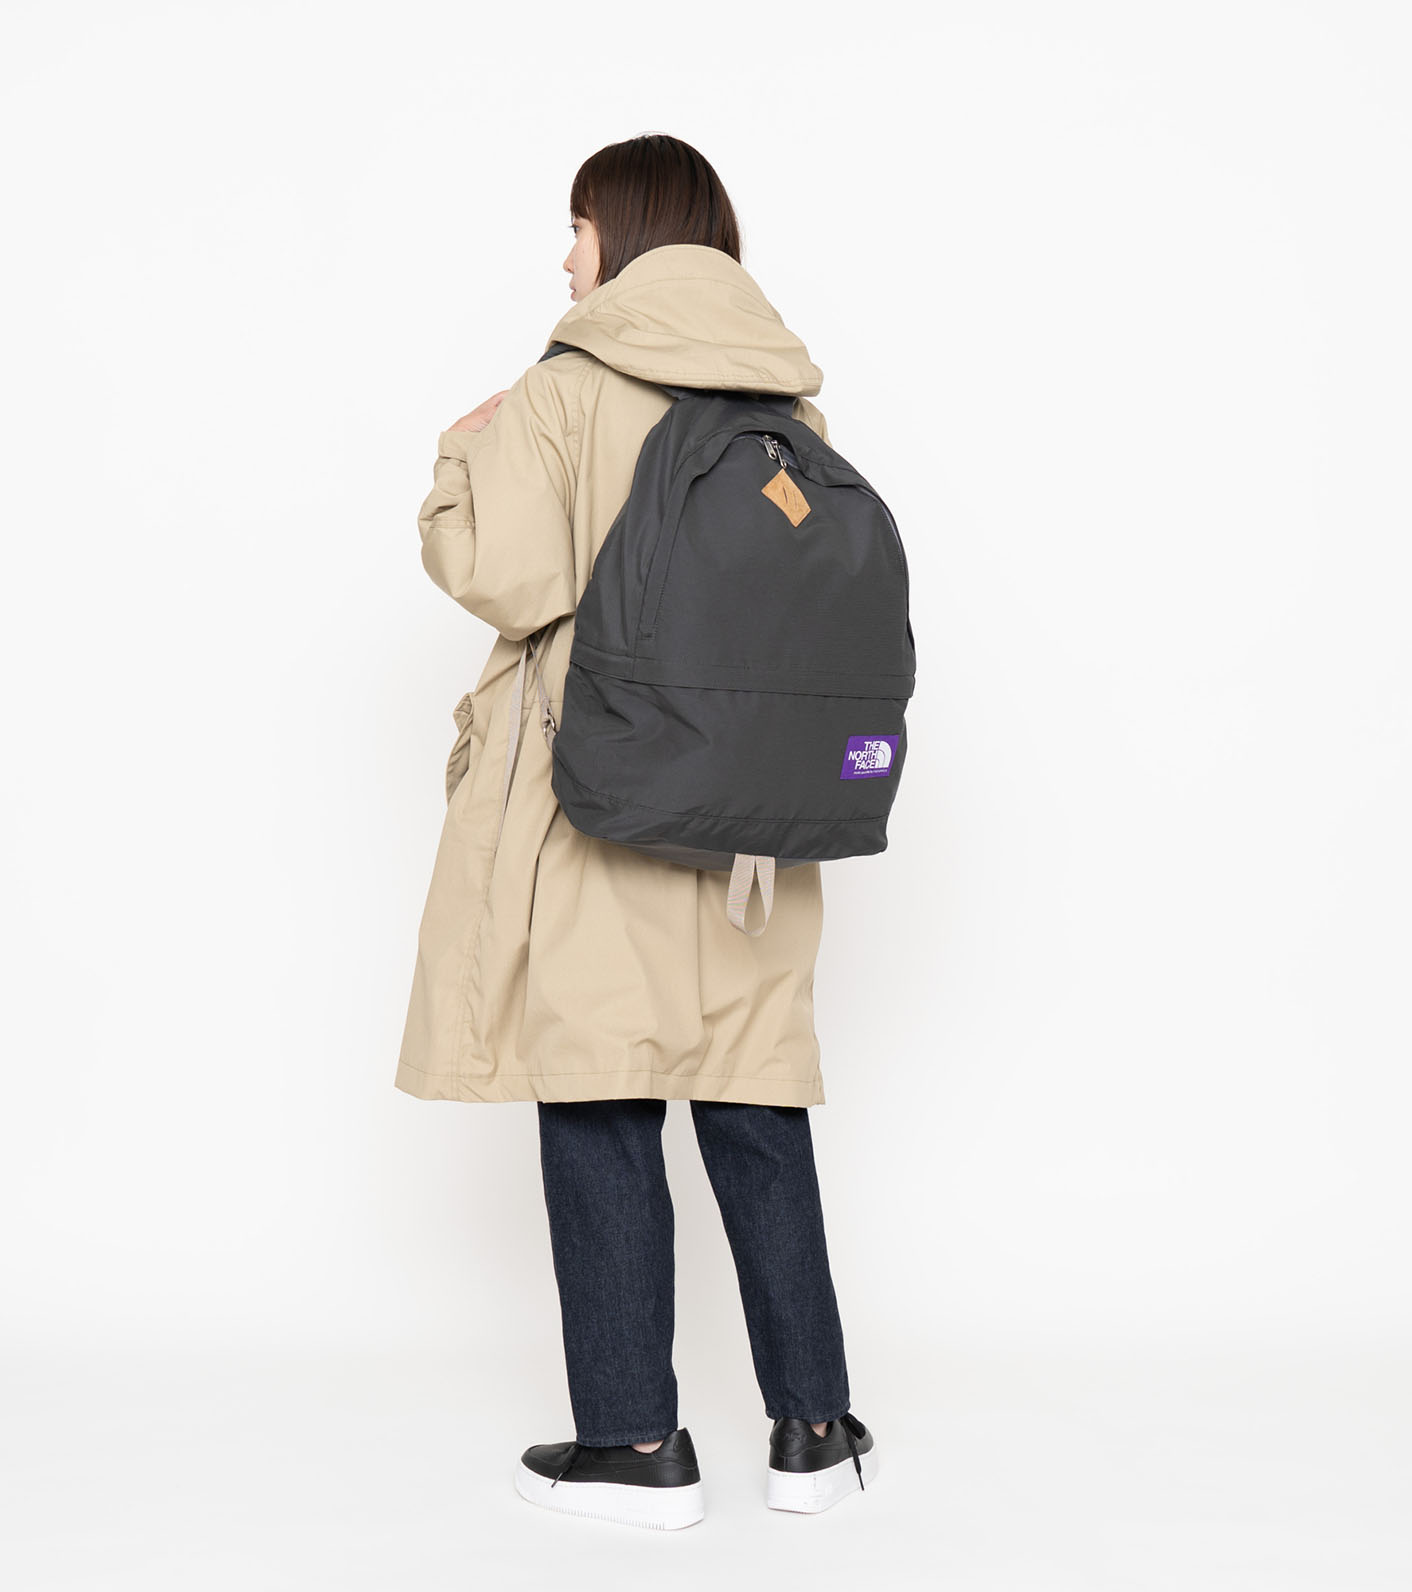 NN7201N【ほぼ未使用】 THE NORTH FACE Field Day Pack - バッグ